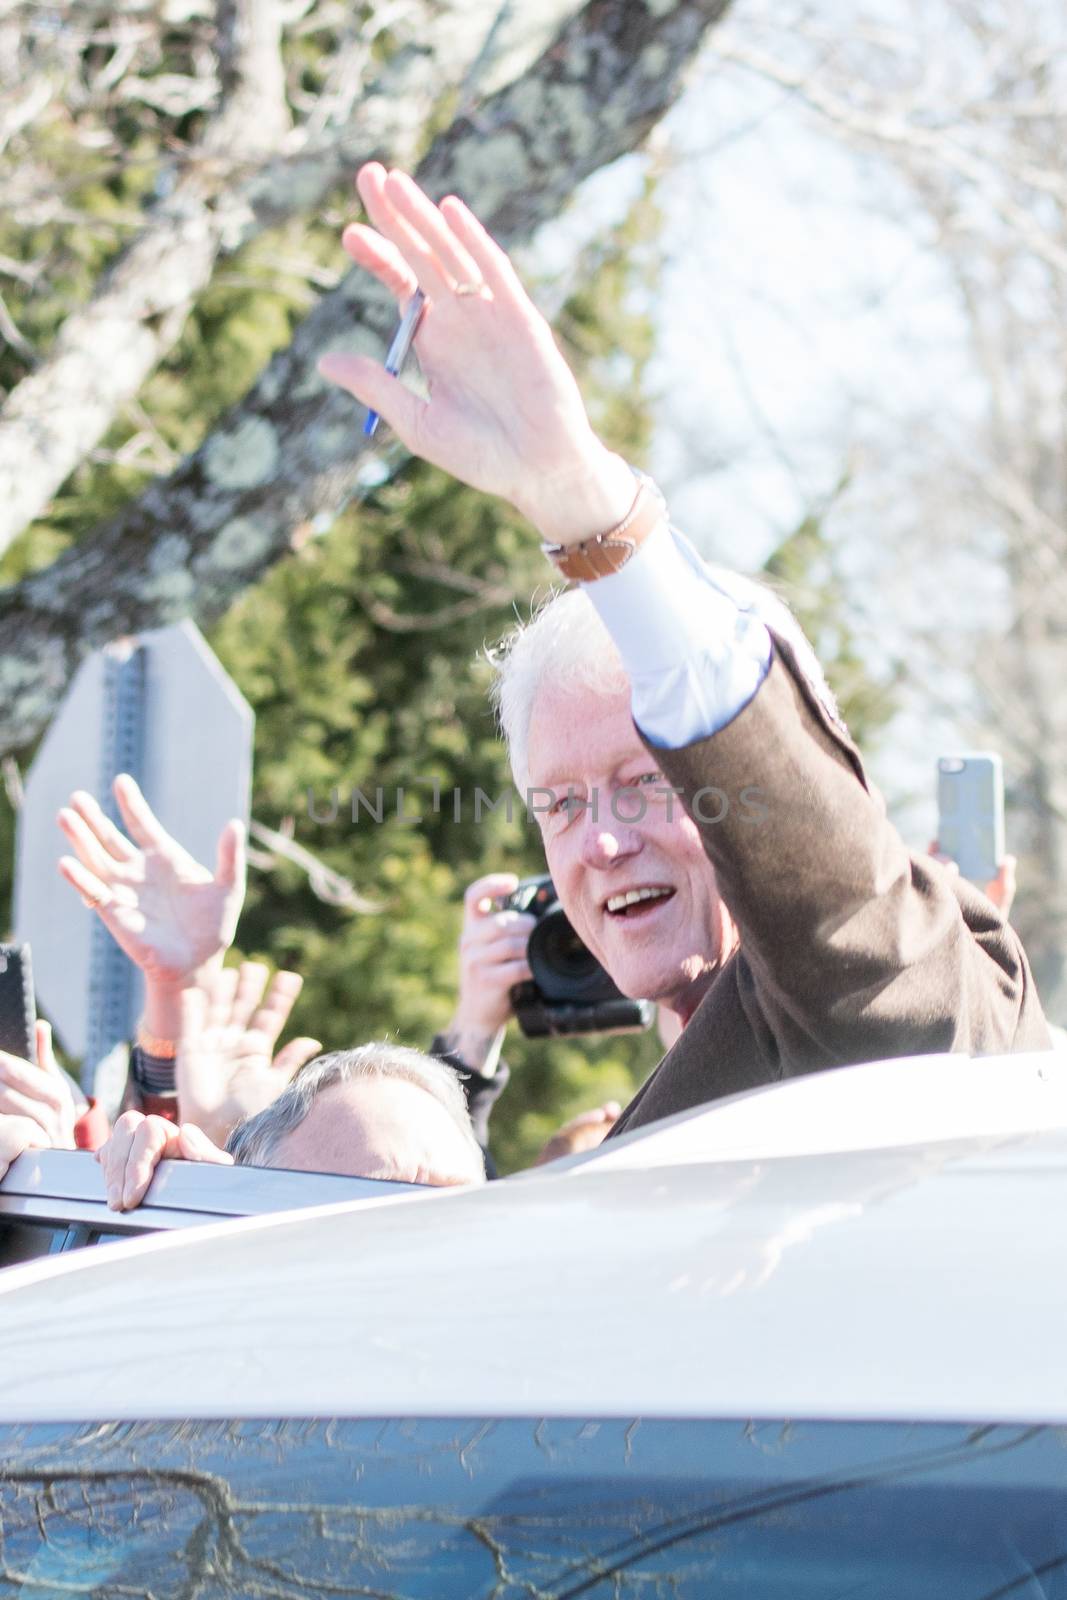 MASSACHUSETTS, New Bedford: Former president Bill Clinton waves at Hillary Clinton's supporters during the Super Tuesday in New Bedford, Massachusetts, on March 1, 2016. The former president was initially suspected of violating state voting rules that ban the solicitation of votes within 150 feet of a polling place. A spokesman for the Secretary of the Commonwealth later clarified that the event was planned far in advance, and broke no laws.